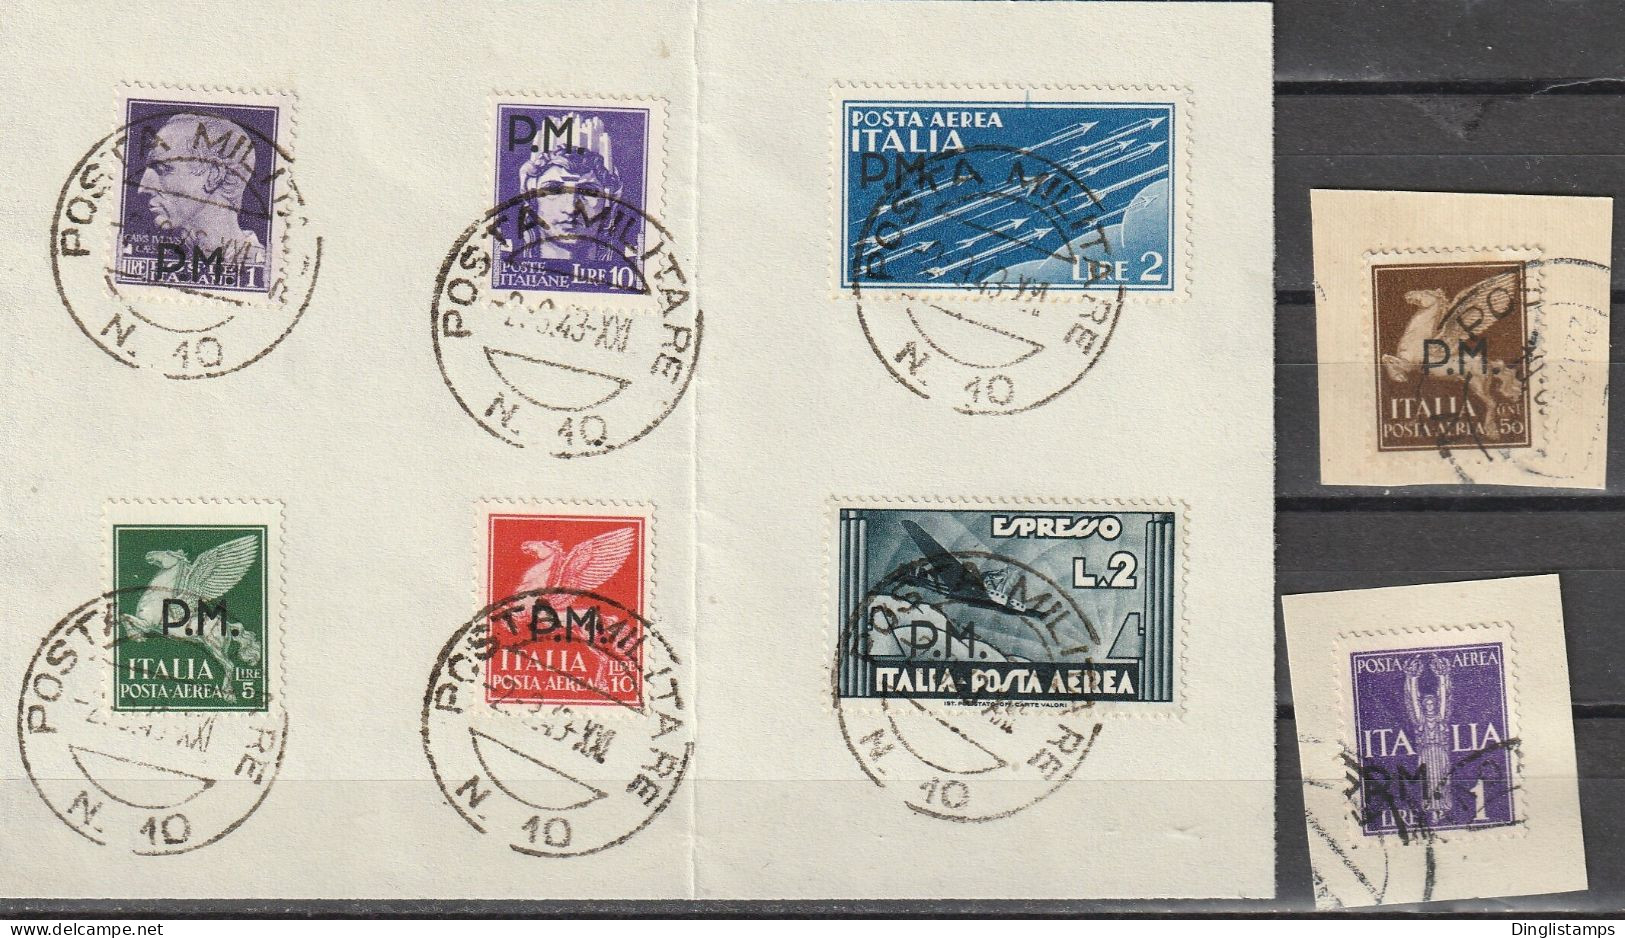 ITALY - 1942 Military Post With Overprint "PM" - Usati